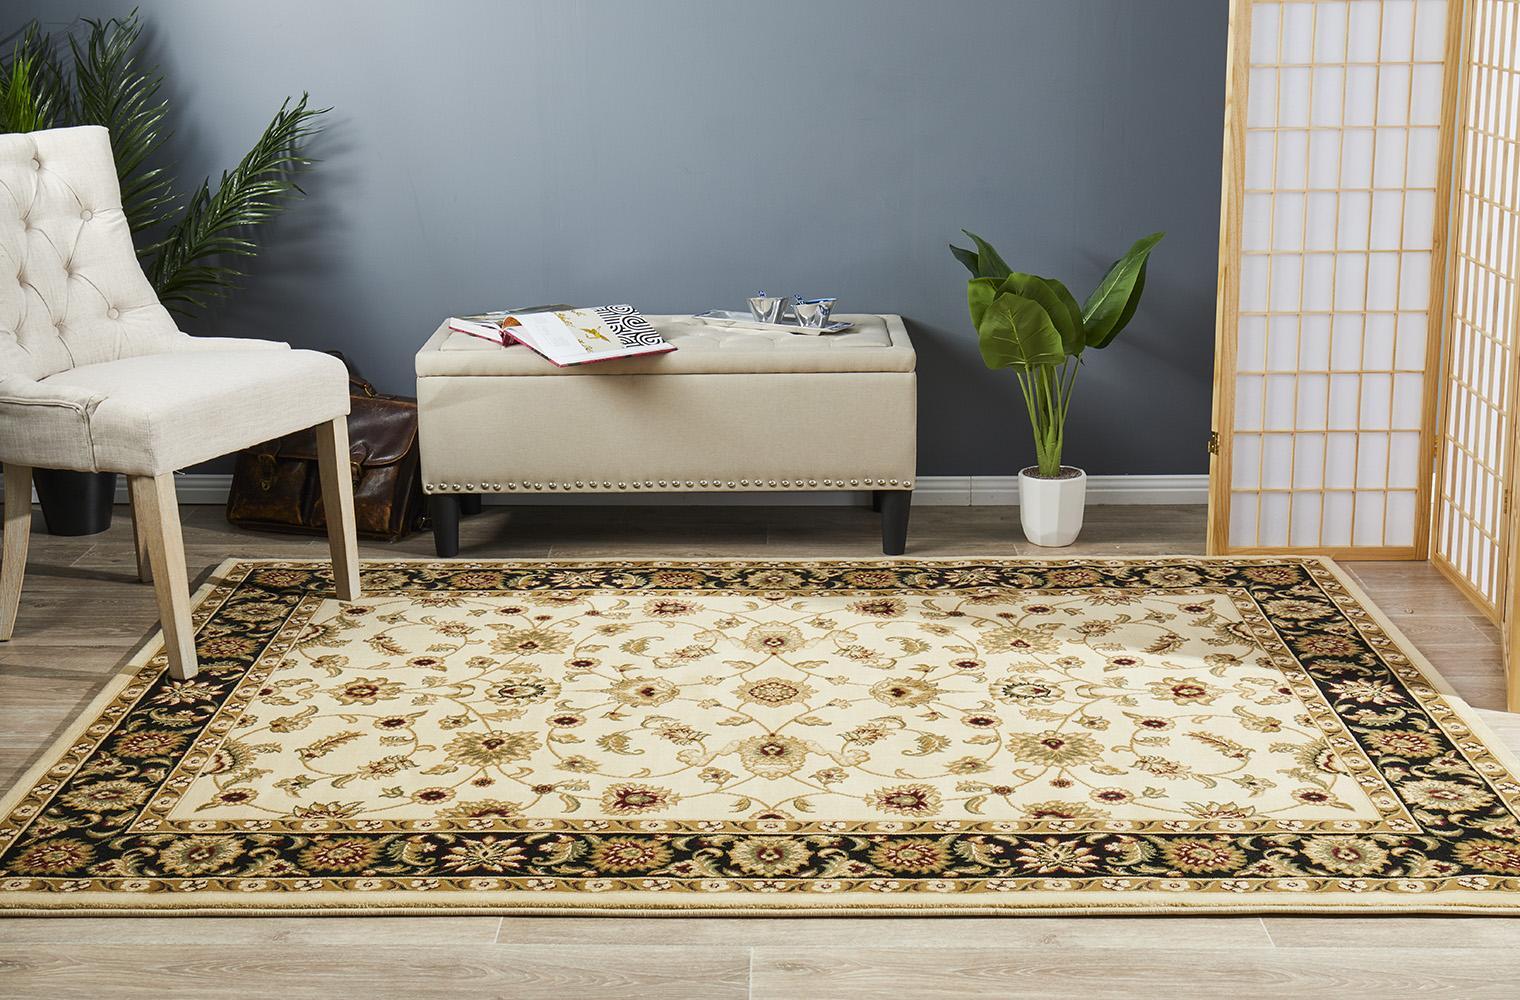 Rug Culture Classic Runner Ivory with Black Border 400x80cm